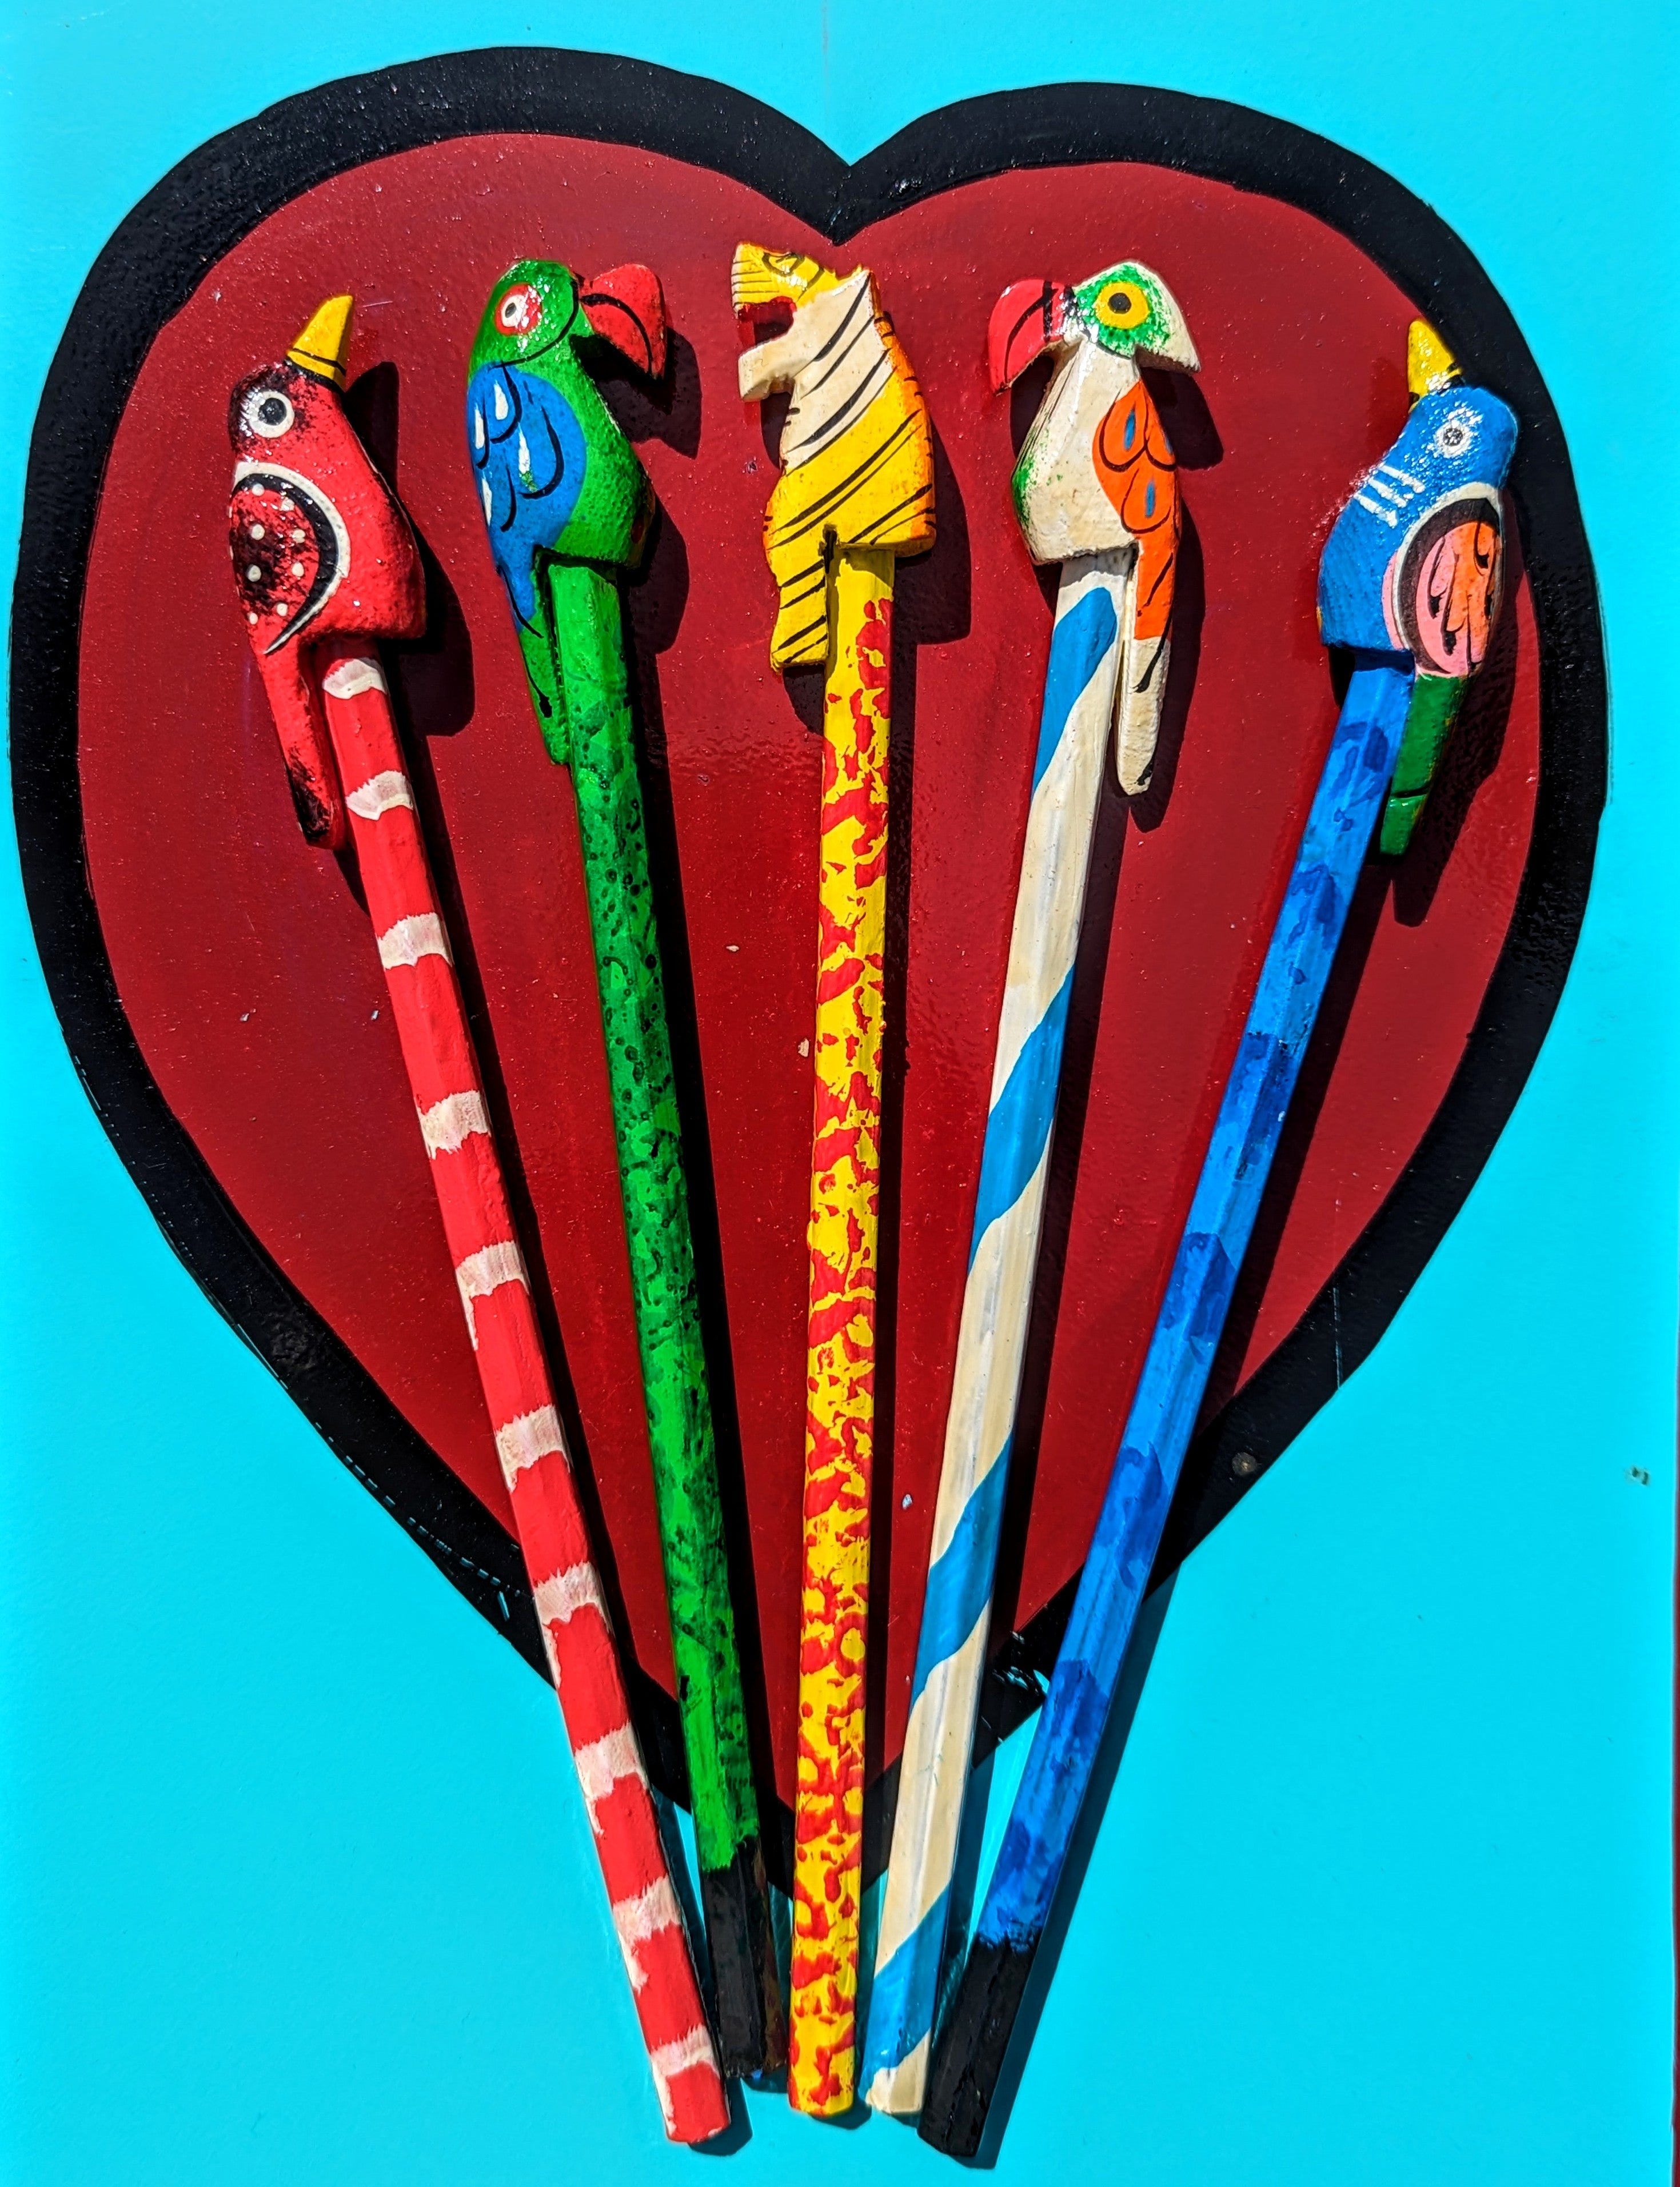 The joy of stationary!! Super cute had carved and hand painted animal pencils,, made by toy makers in Rajasthan ,perfect for that stocking filler or party bag treat!

1 pencil

20 cm long

